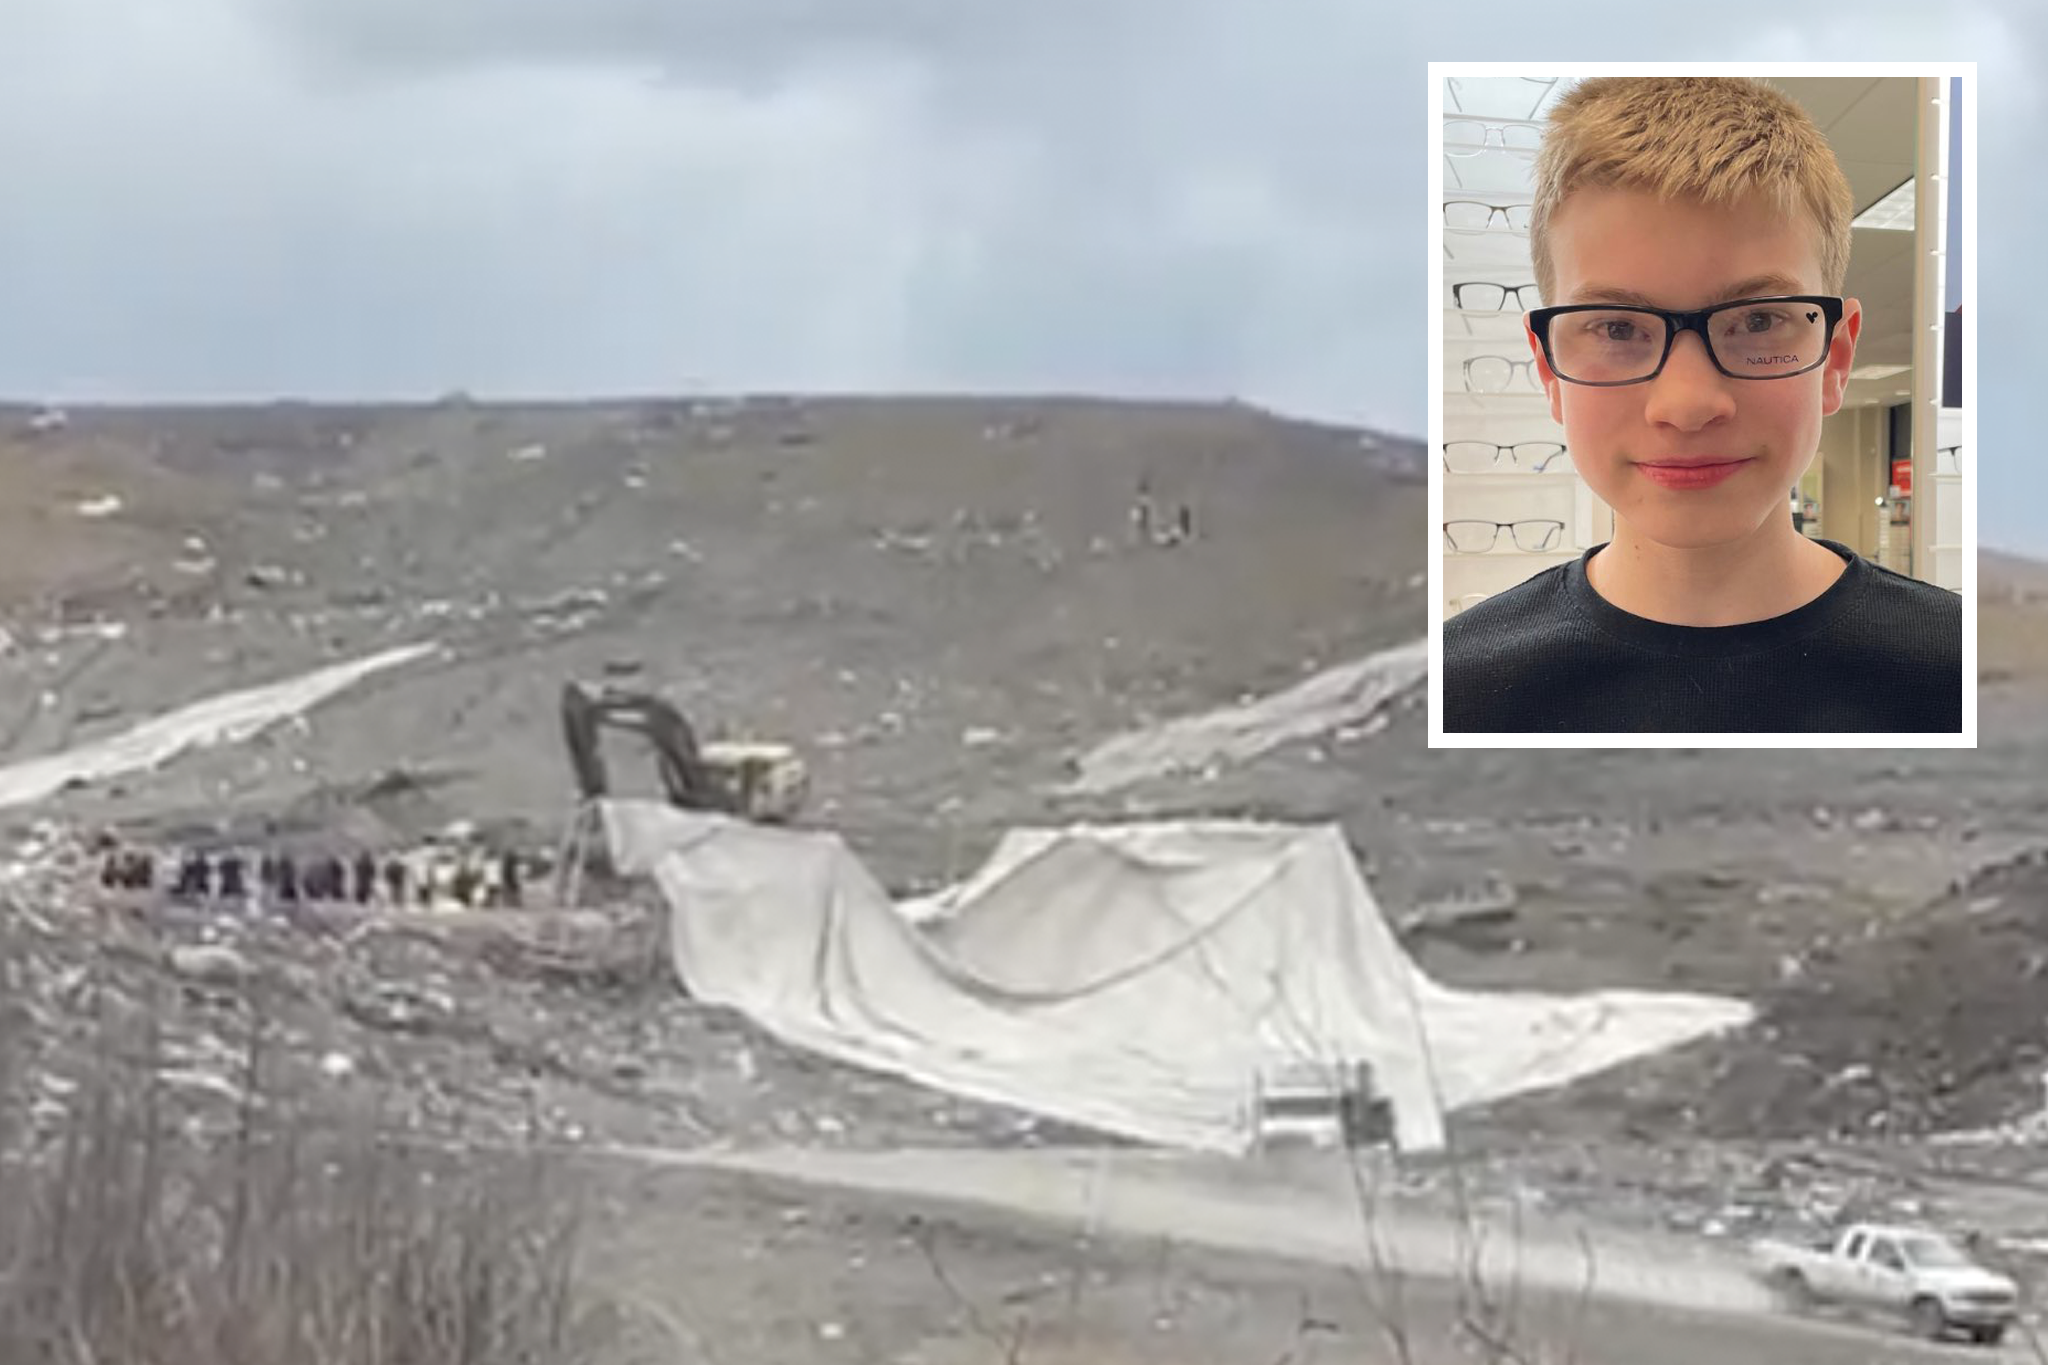 Landfill in Kentucky searched as Sebastian Rogers remains missing